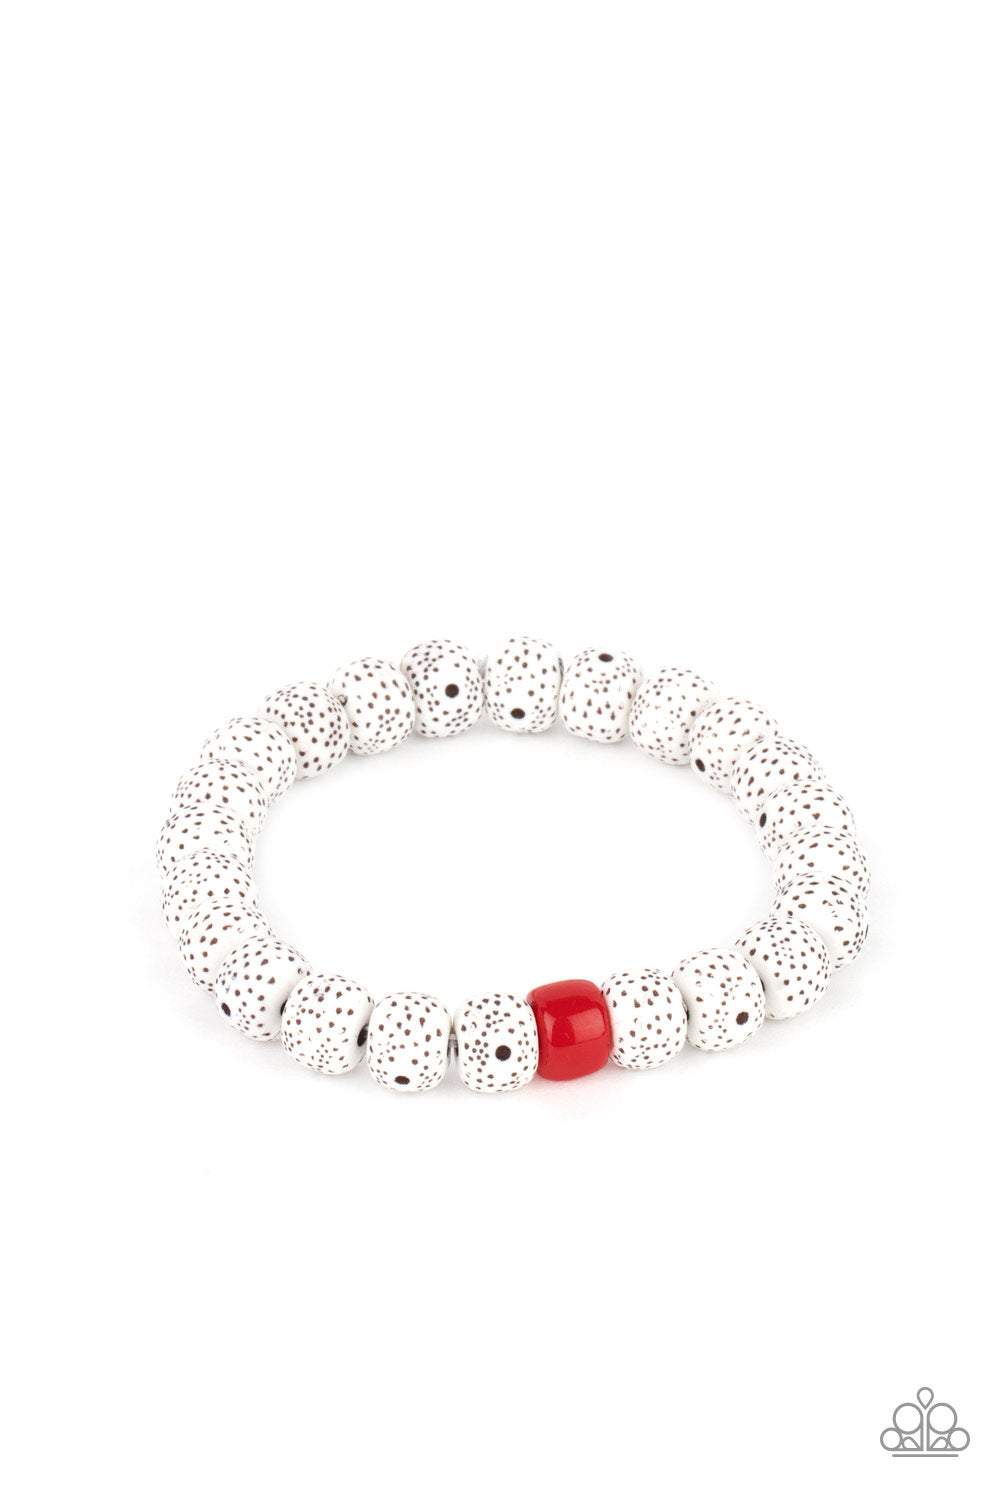 Featuring a fiery red beaded centerpiece, a collection of dotted faux stone beads are threaded along a stretchy band around the wrist for an earthy effect.